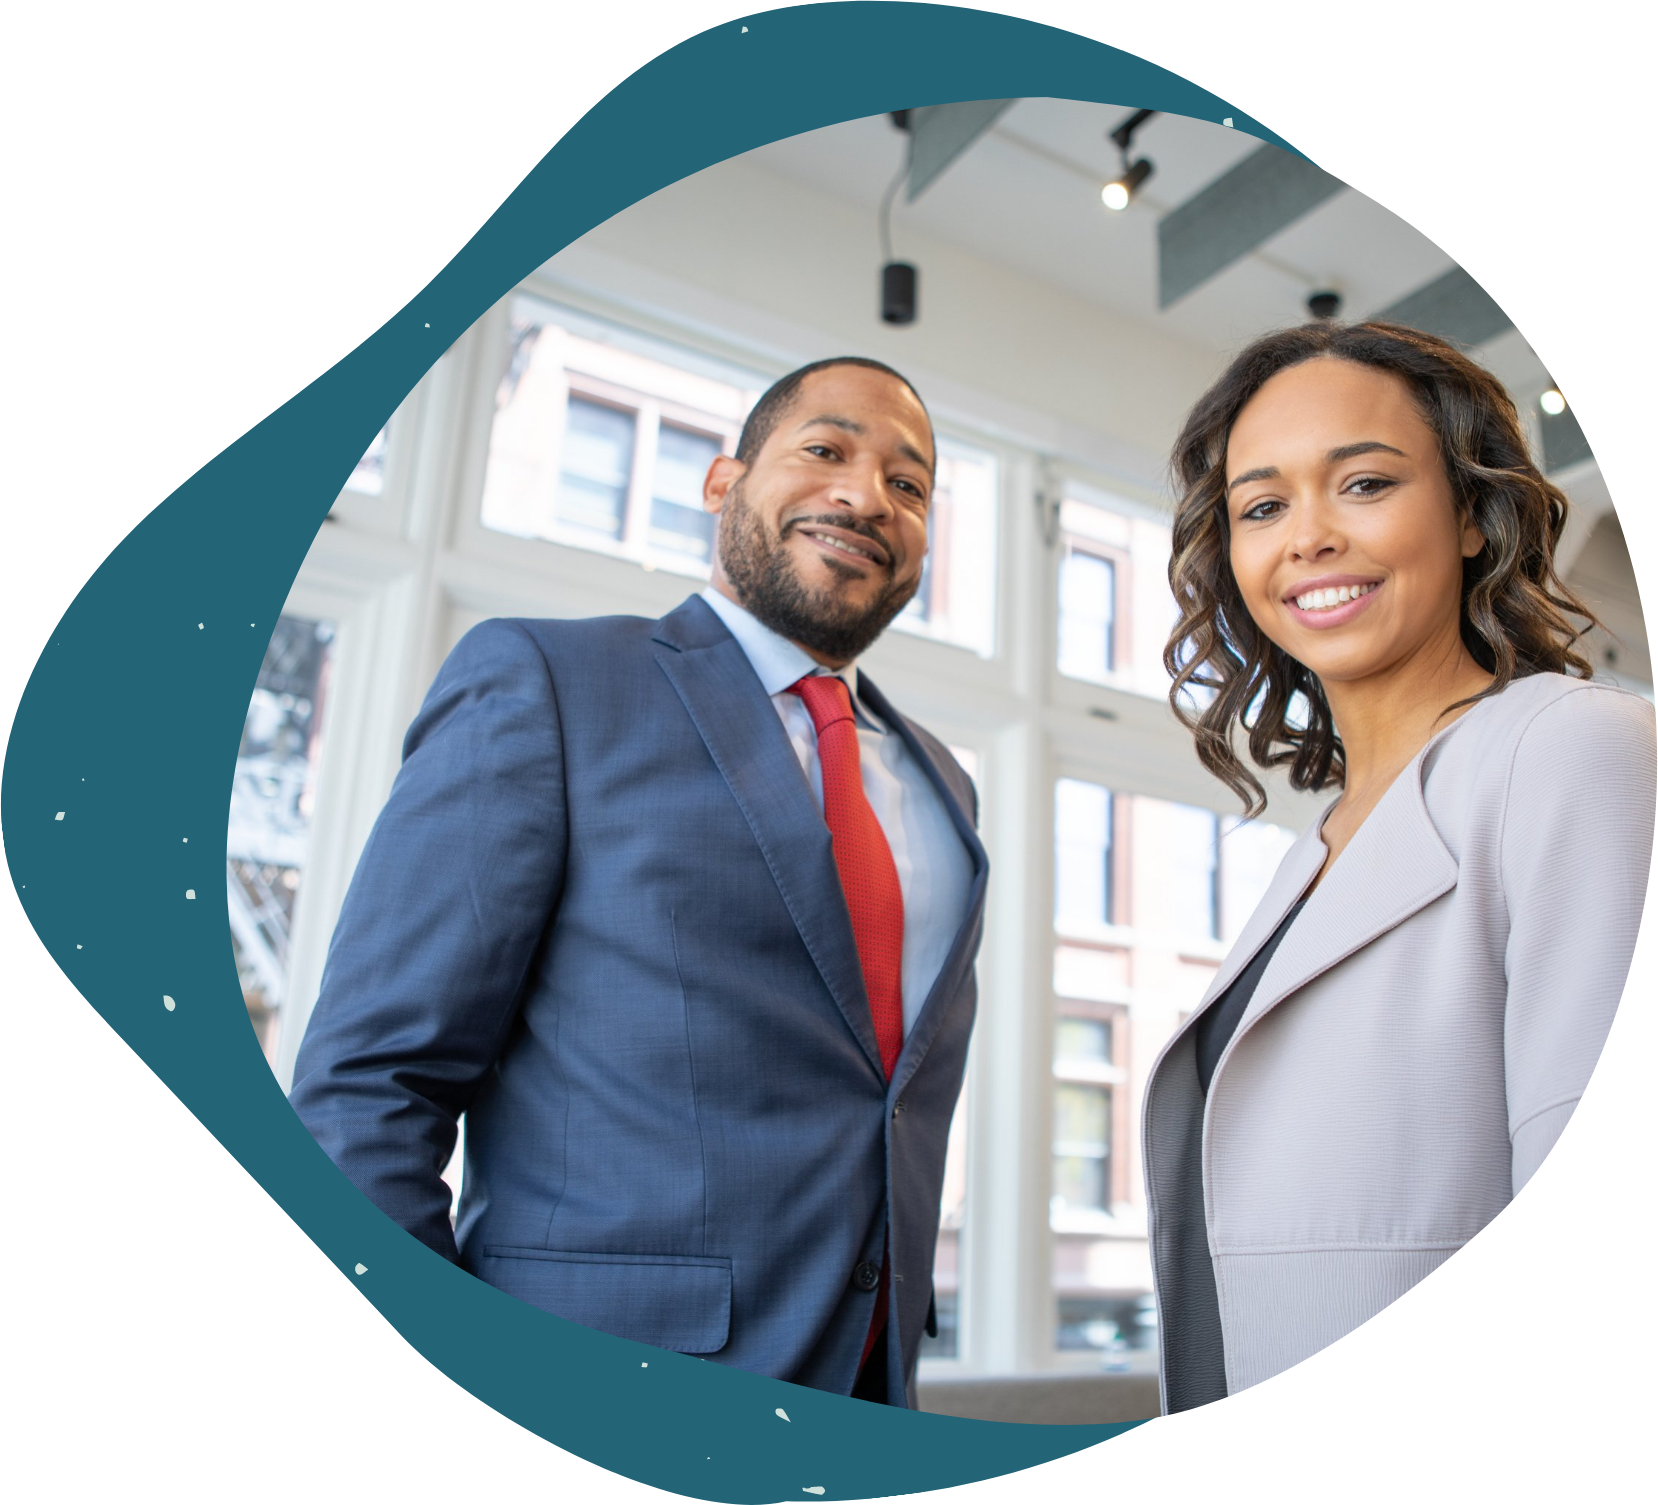 Careerleaf Corporate header image with man and woman wearing business suits looking down at camera in office